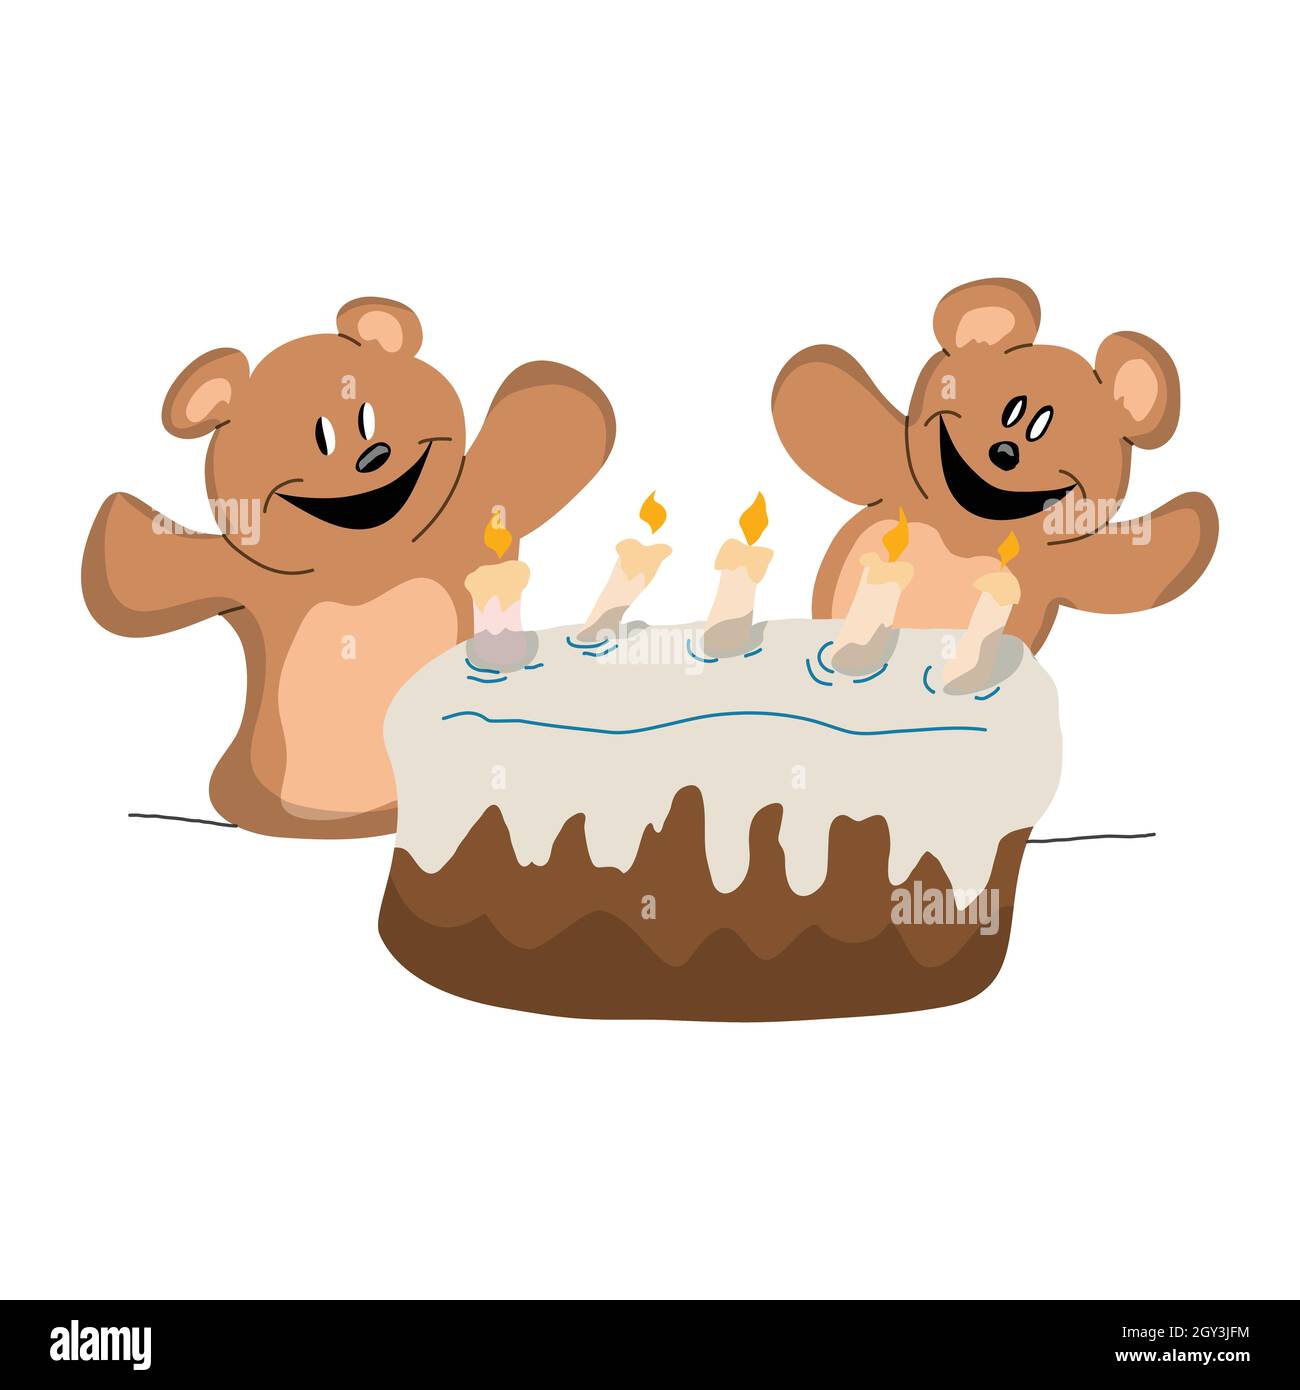 Two bears celebrating a birthday party vector illustration Stock Vector